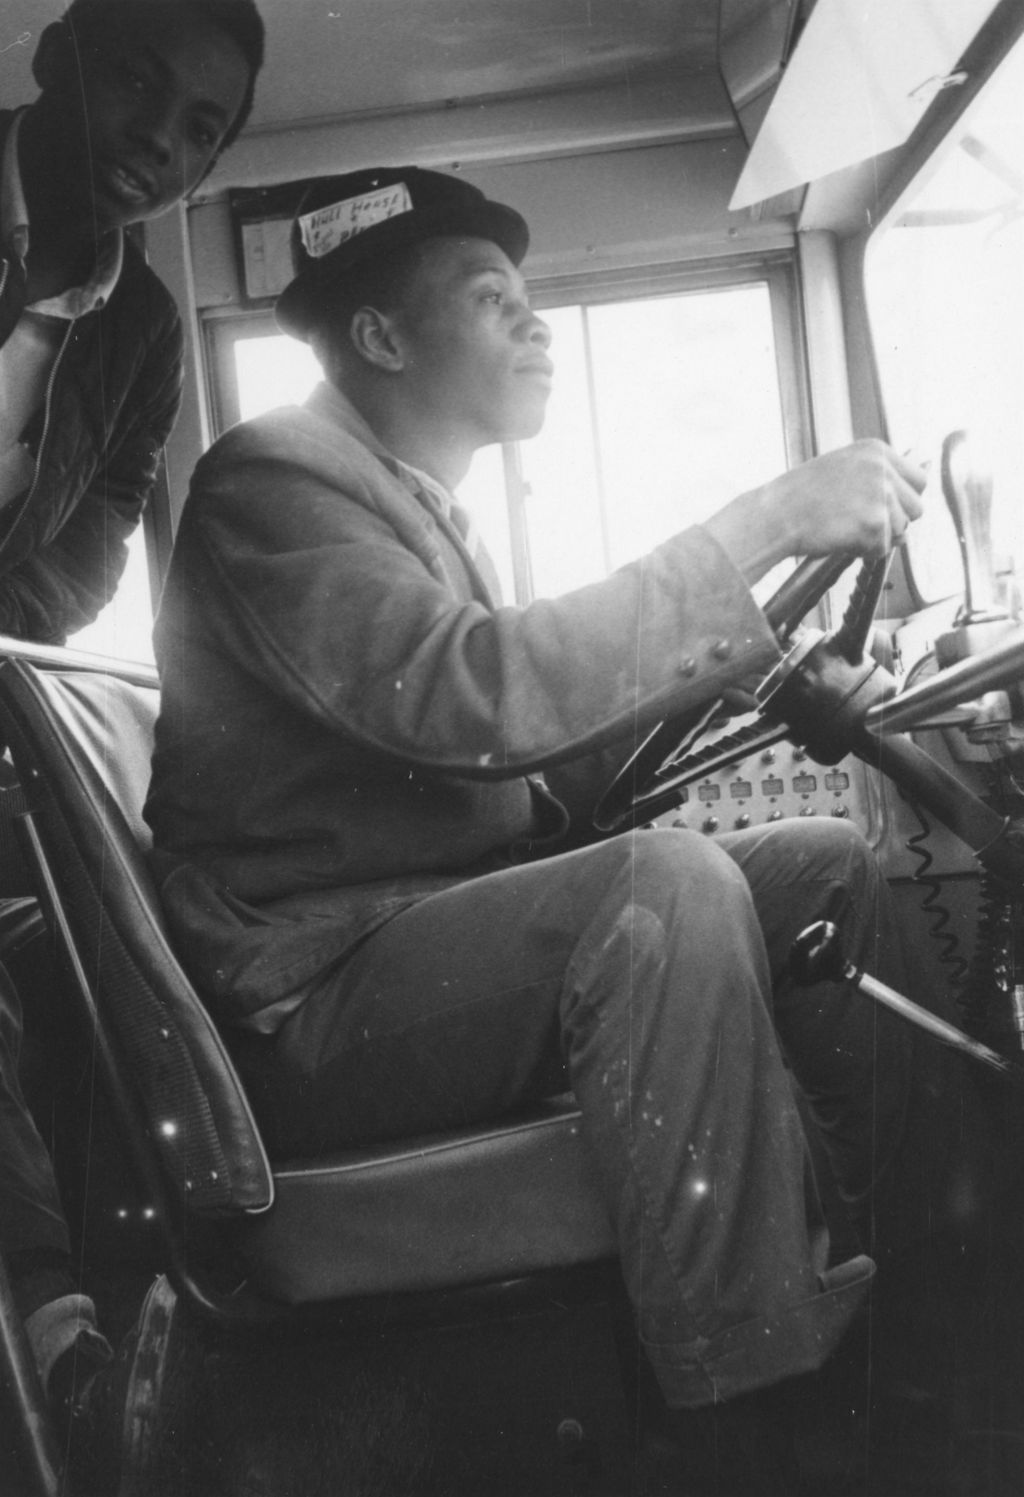 Two young men on a bus